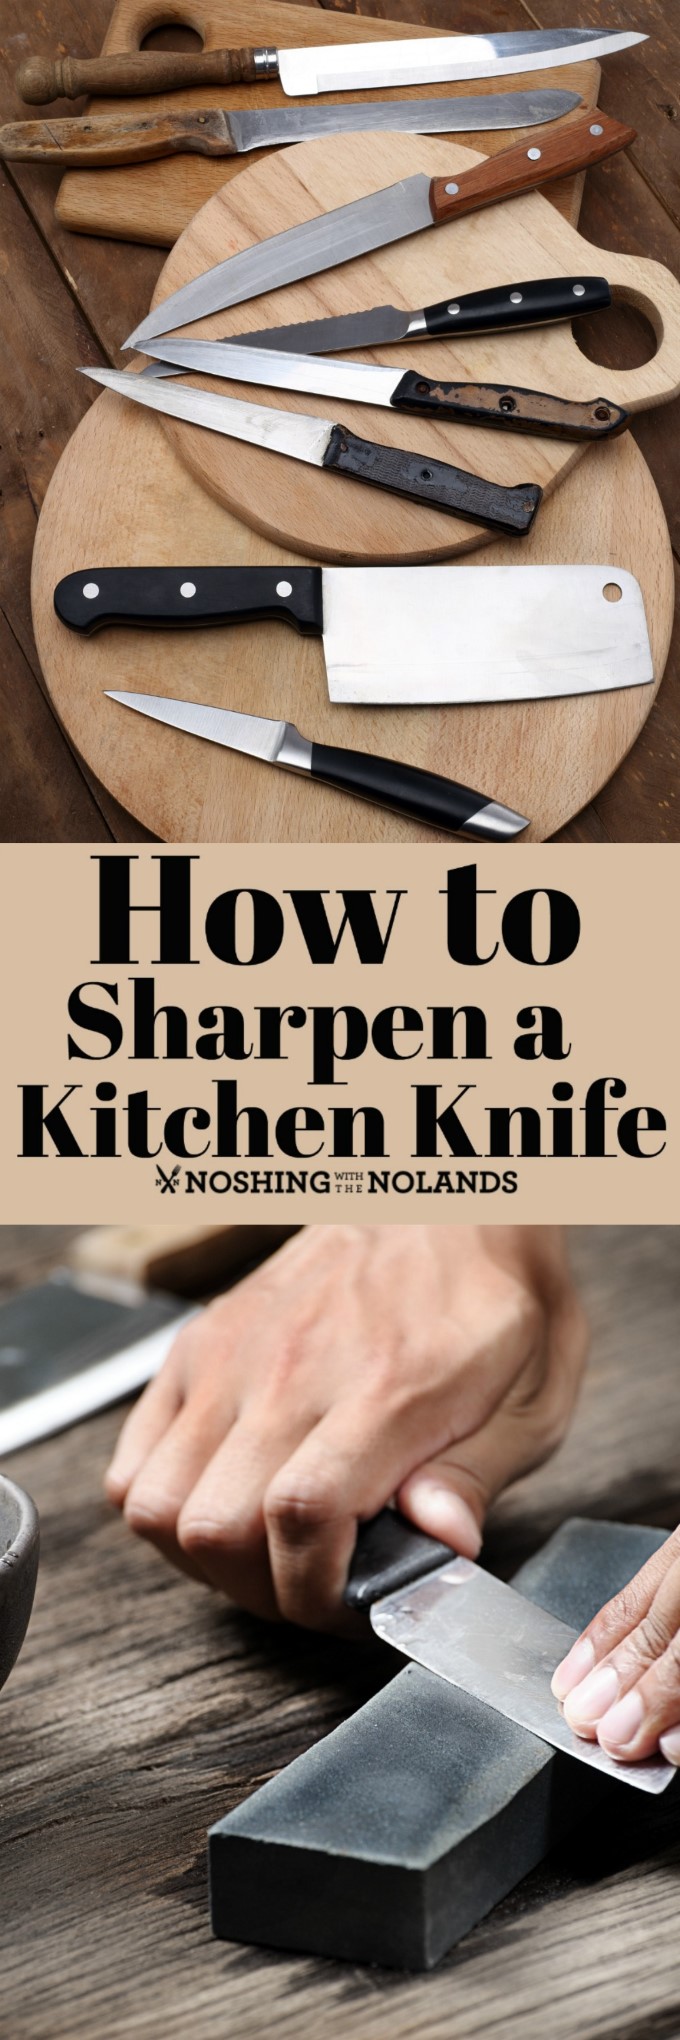 https://noshingwiththenolands.com/wp-content/uploads/2019/03/How-to-Sharpen-a-Kitchen-Knife-Collage-Custom.jpg